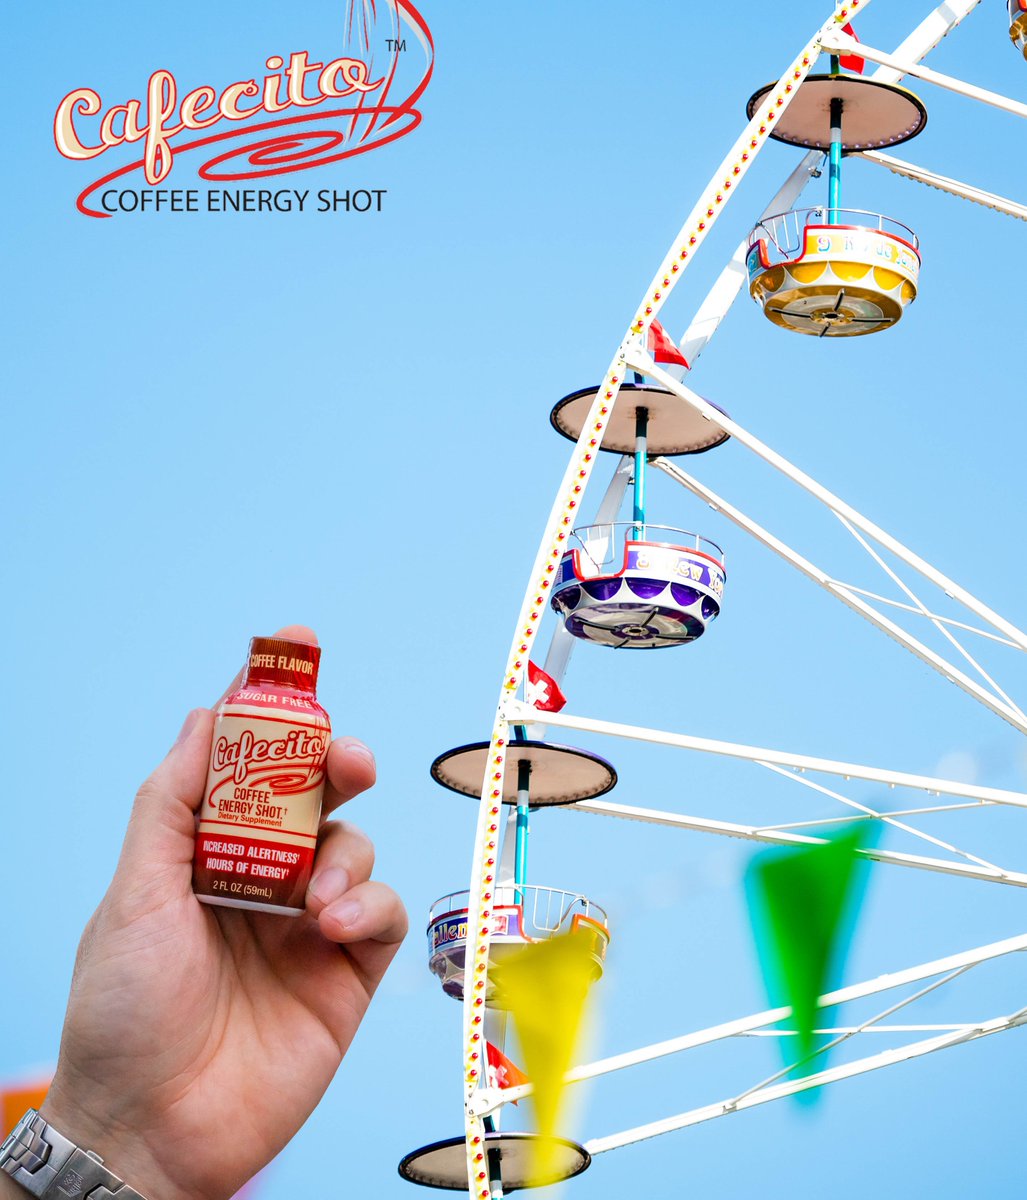 It's our favorite time of year! 😝

#cafecitoenergy #cafecito #energy #cafecitotime #betterenergy #youthfair
#fair #festival #ferriswheel #rides #naturalenergy